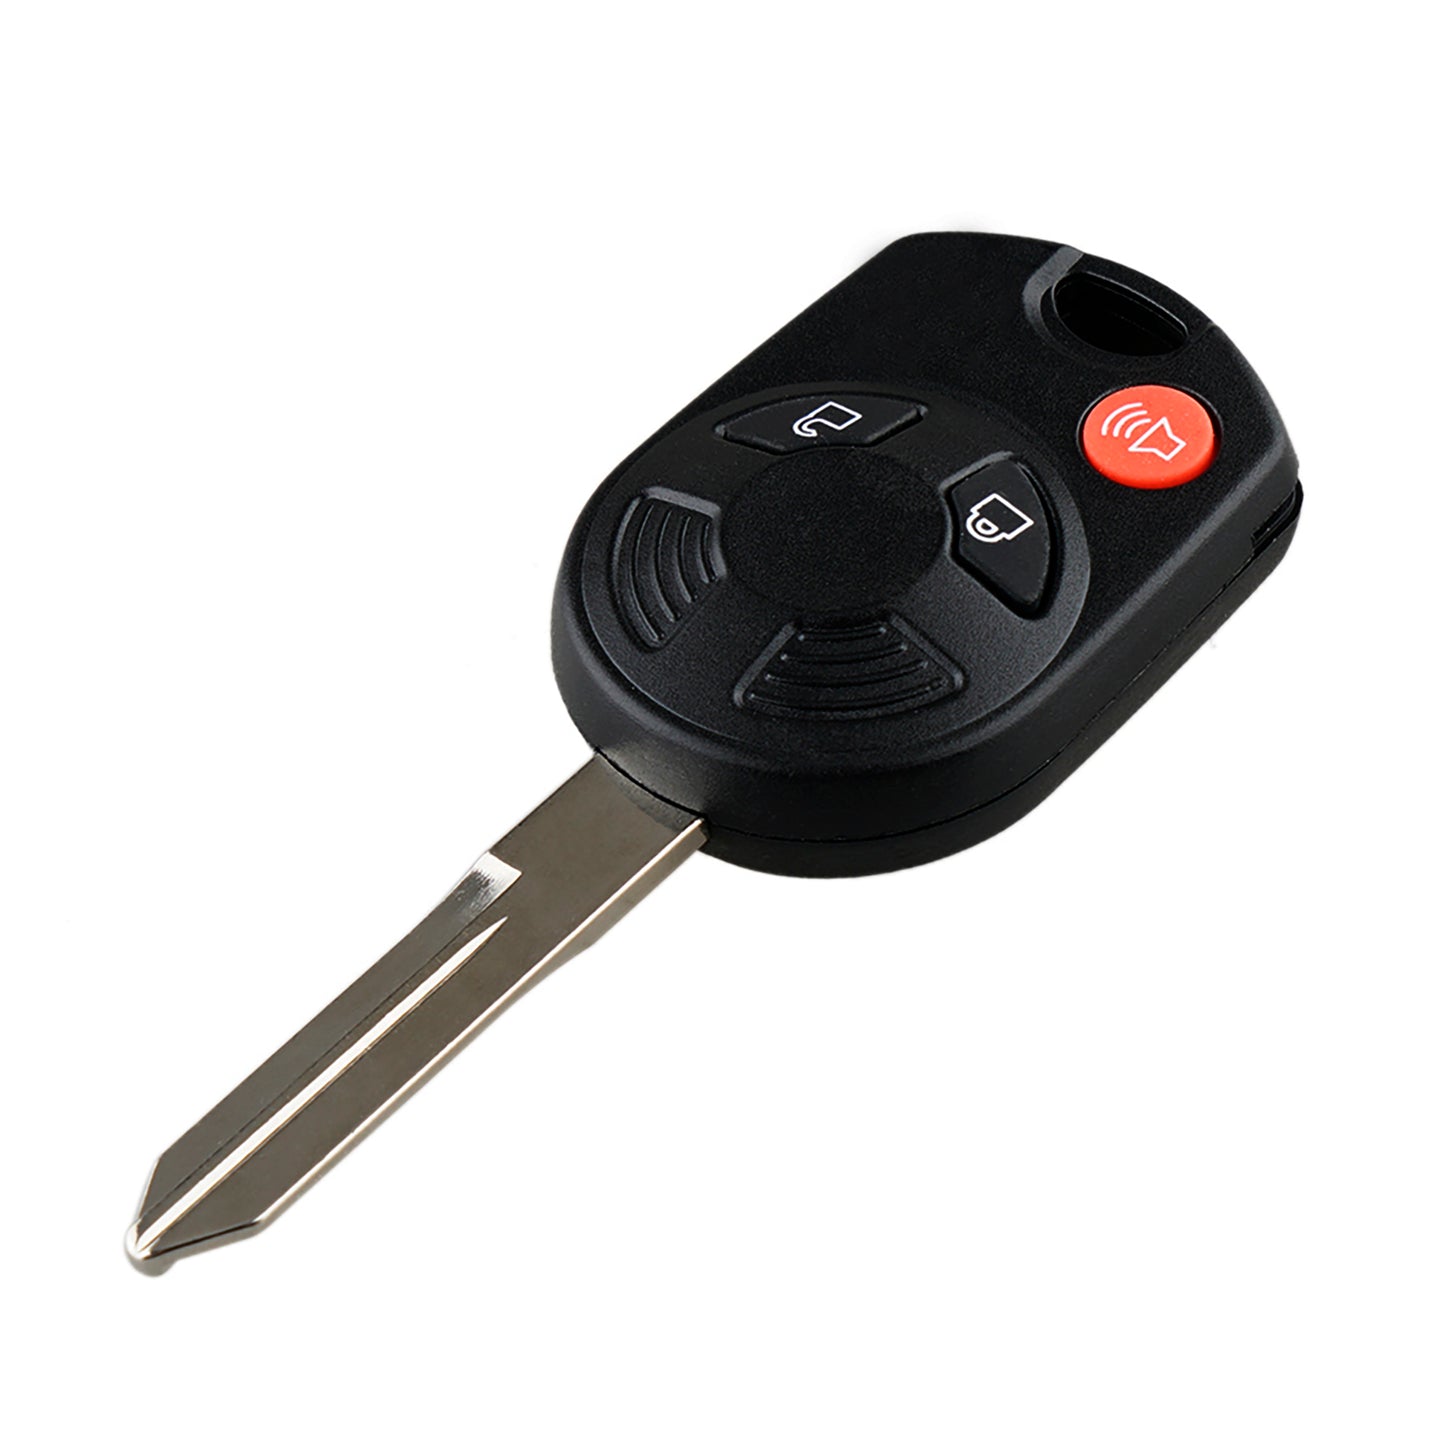 3 Buttons 315MHz Smart Car Key Fob Remote Key for 2000-2018 Ford Lincoln Mazda Mercury FCC ID: OUCD6000022 SKU : J046